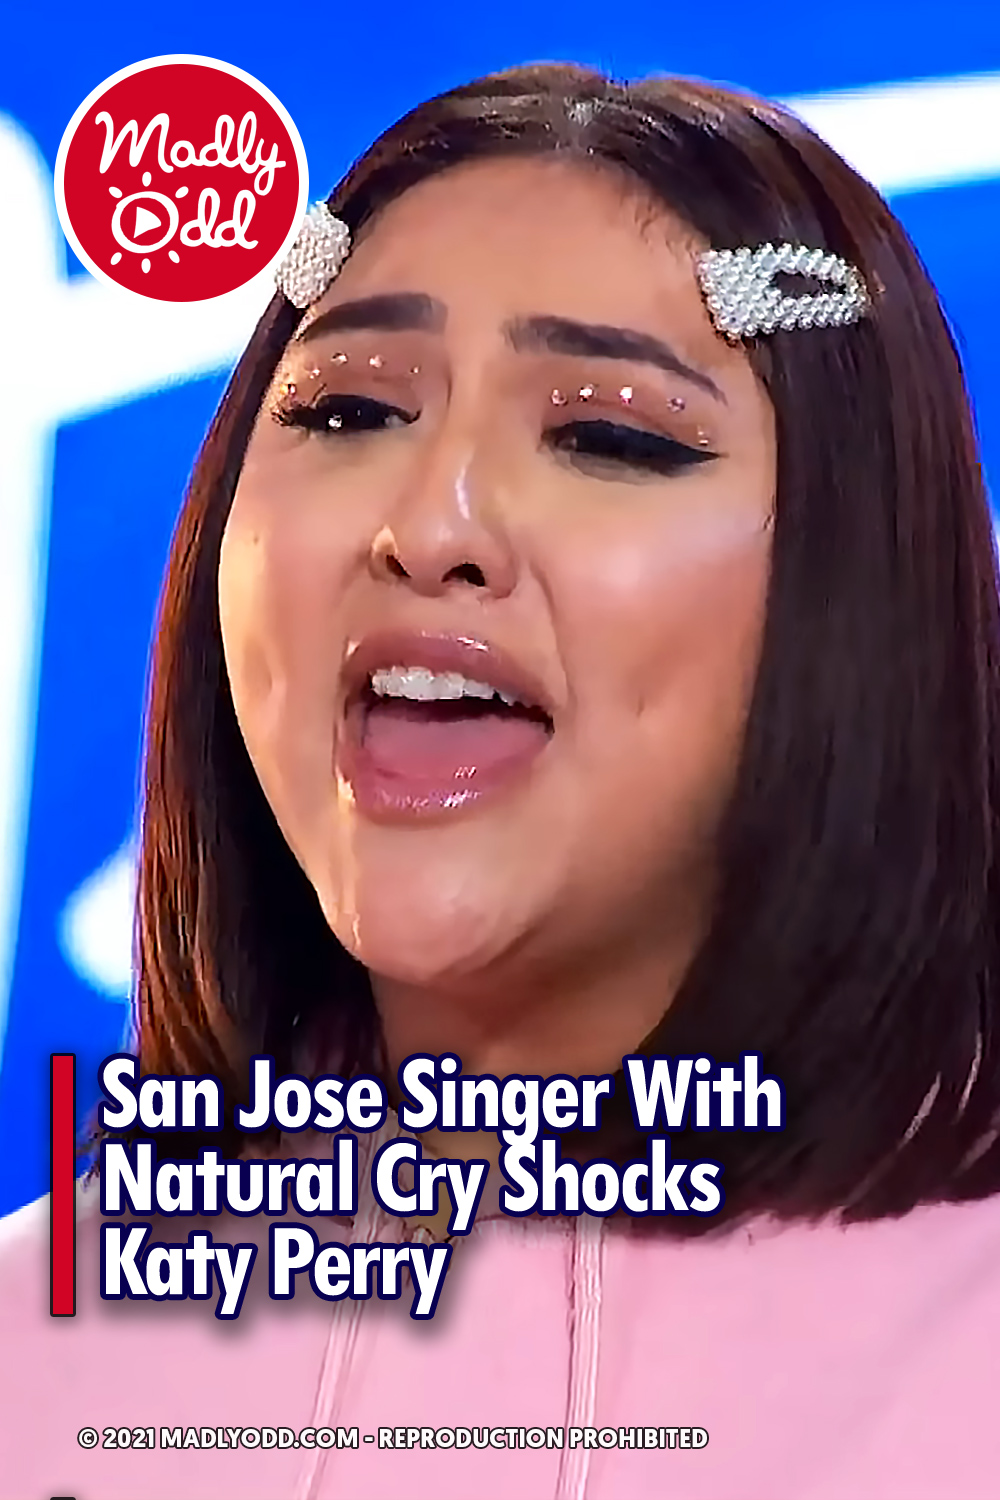 San Jose Singer With Natural Cry Shocks Katy Perry